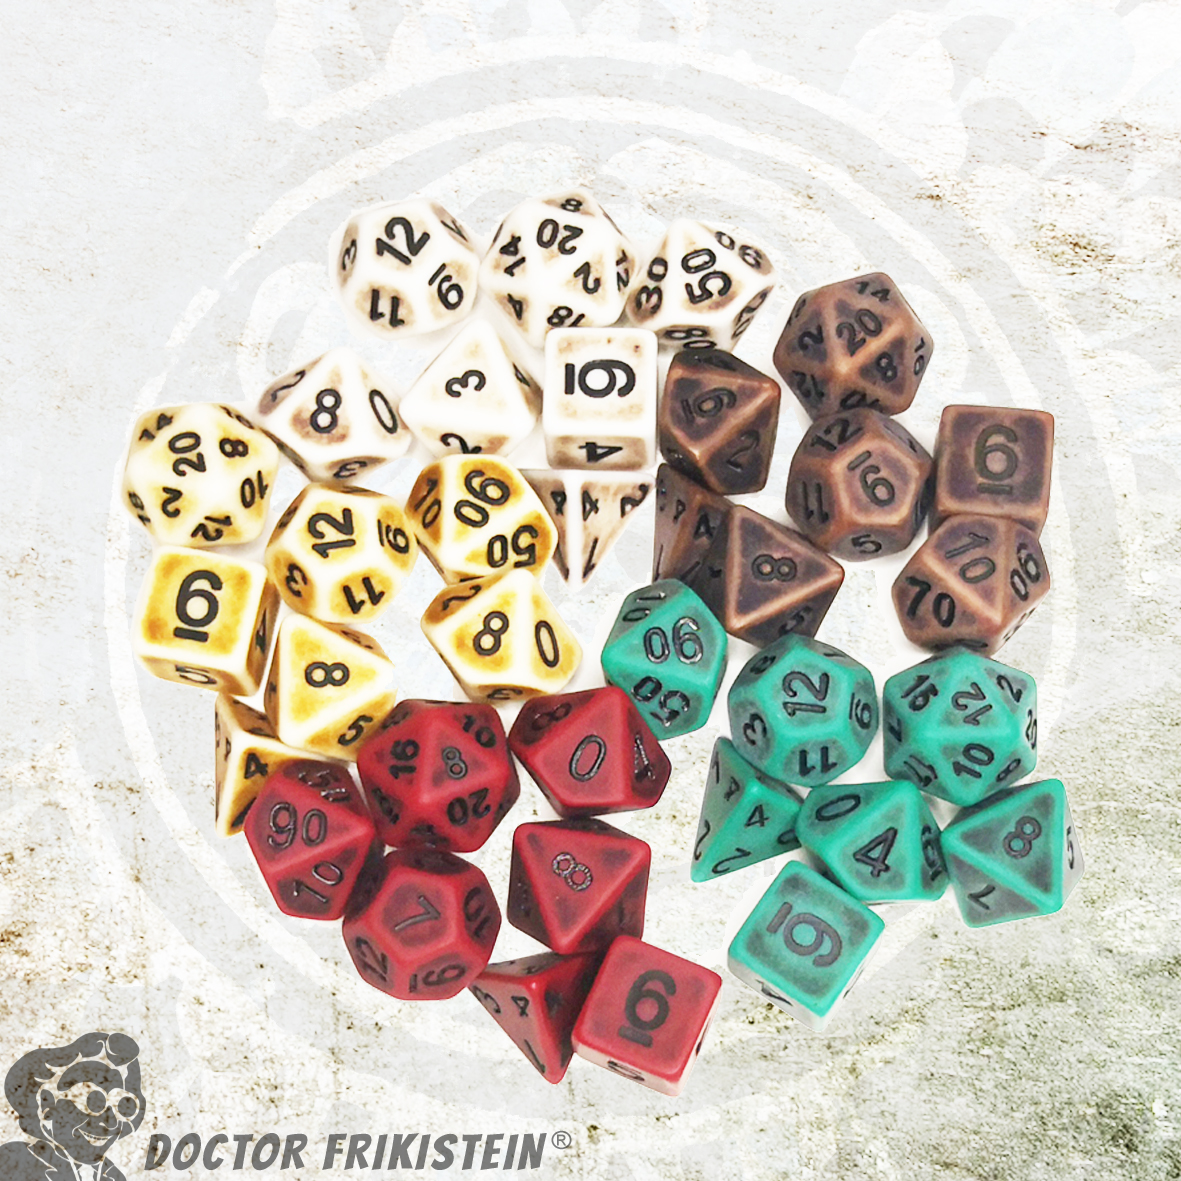 RPG ANTIQUE DICE AND MORE NEWS